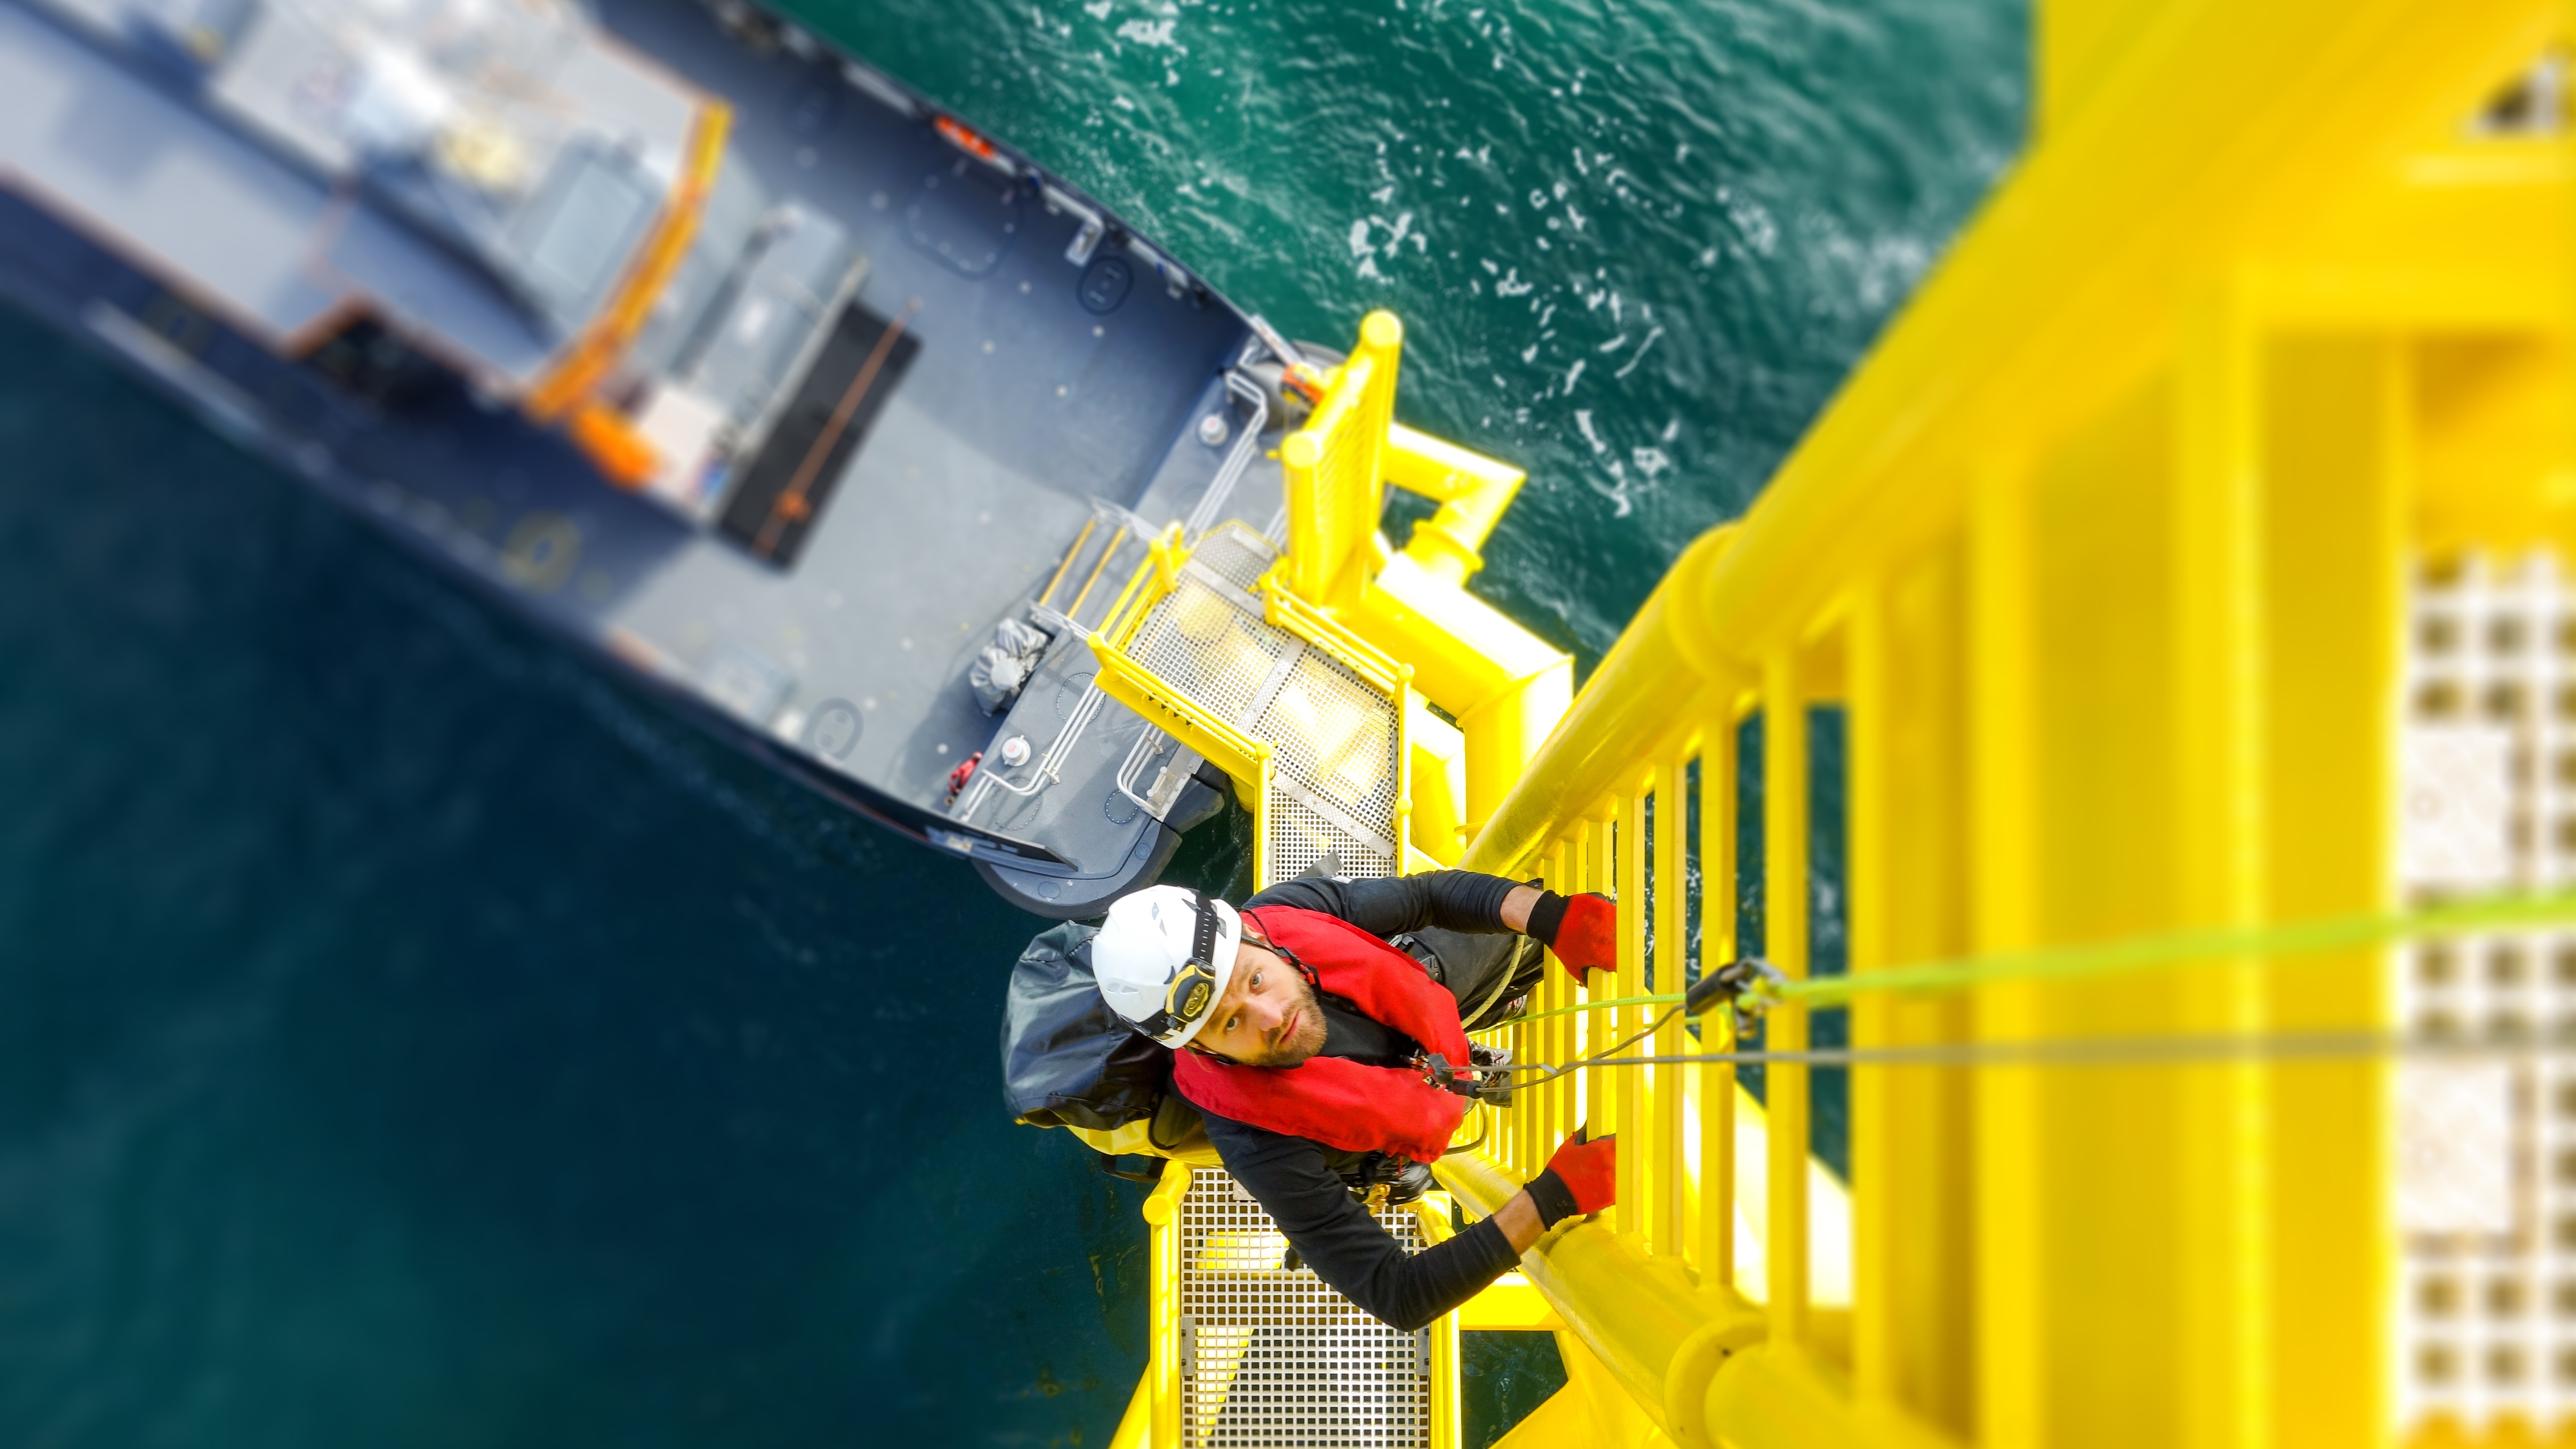 Partner with us to manage your marine risks